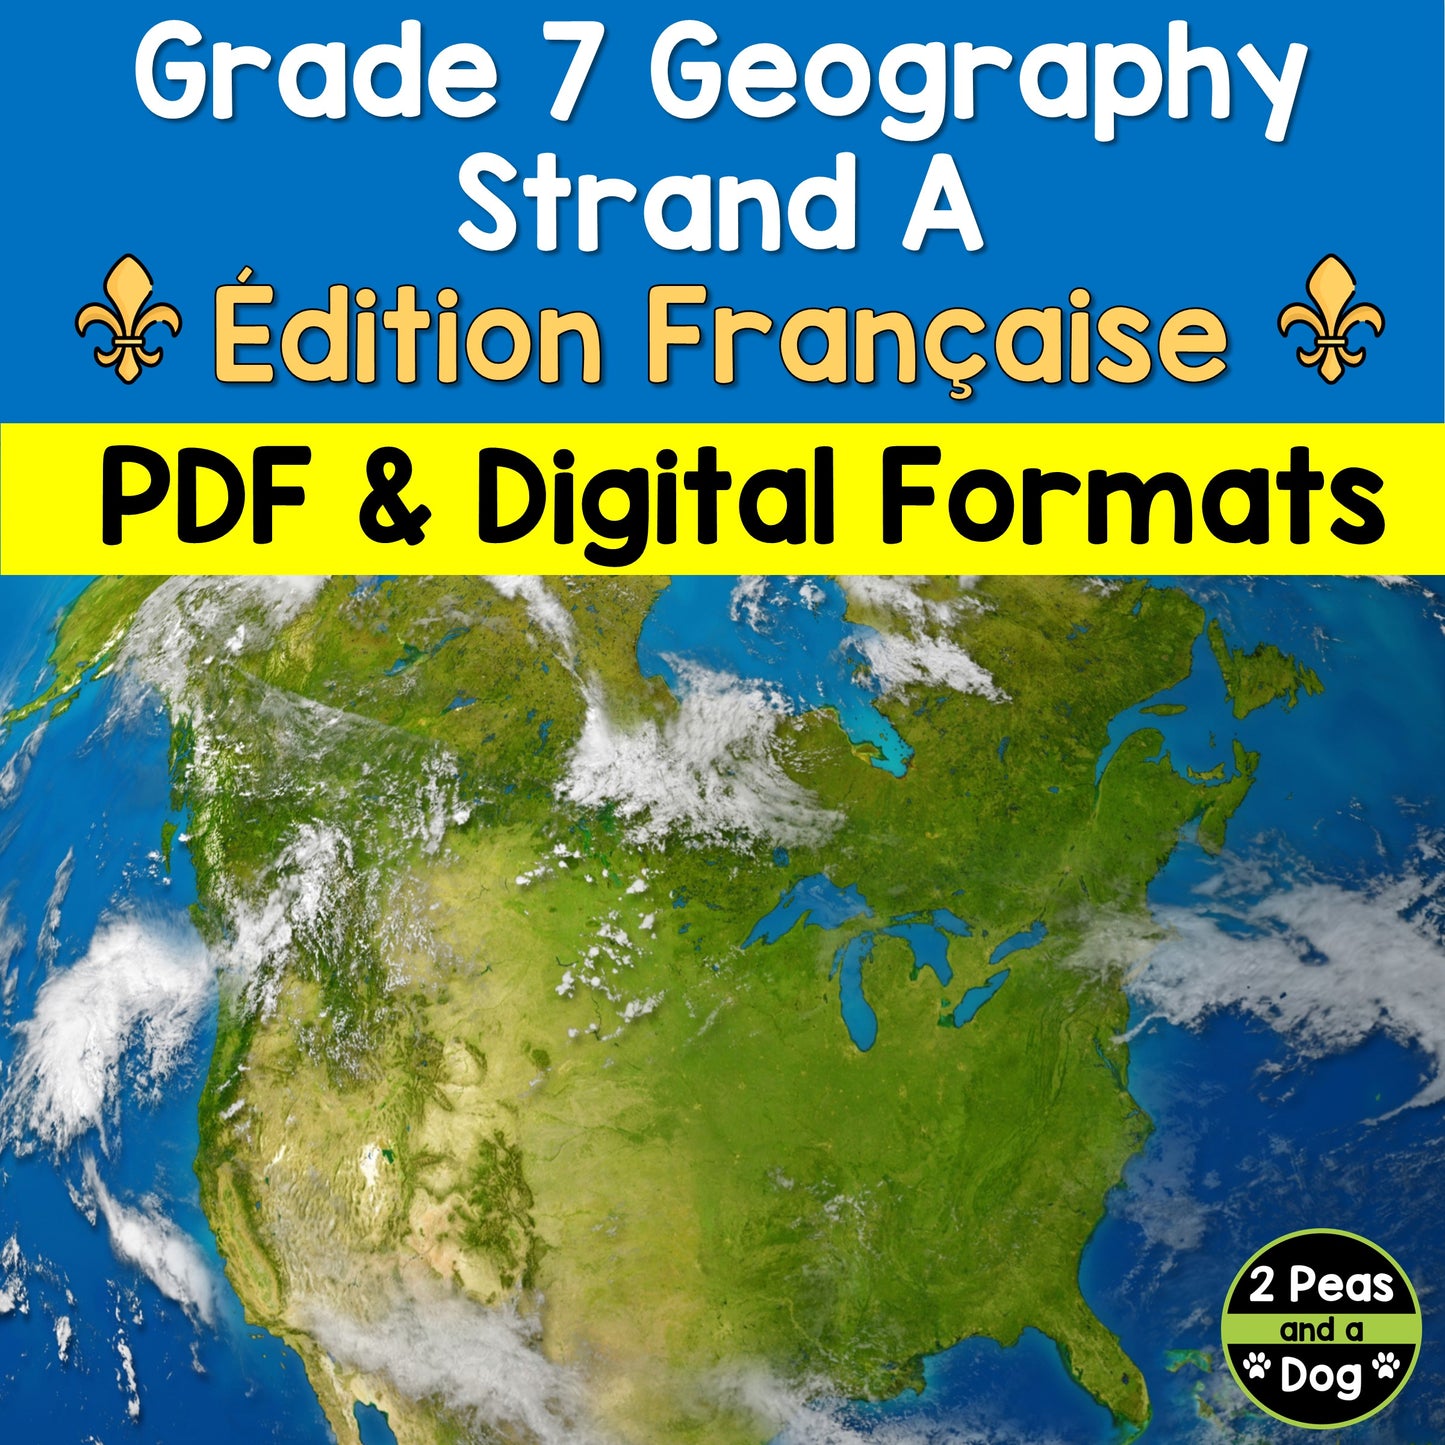 Grade 7 Geography Strand A Ontario Curriculum FRENCH